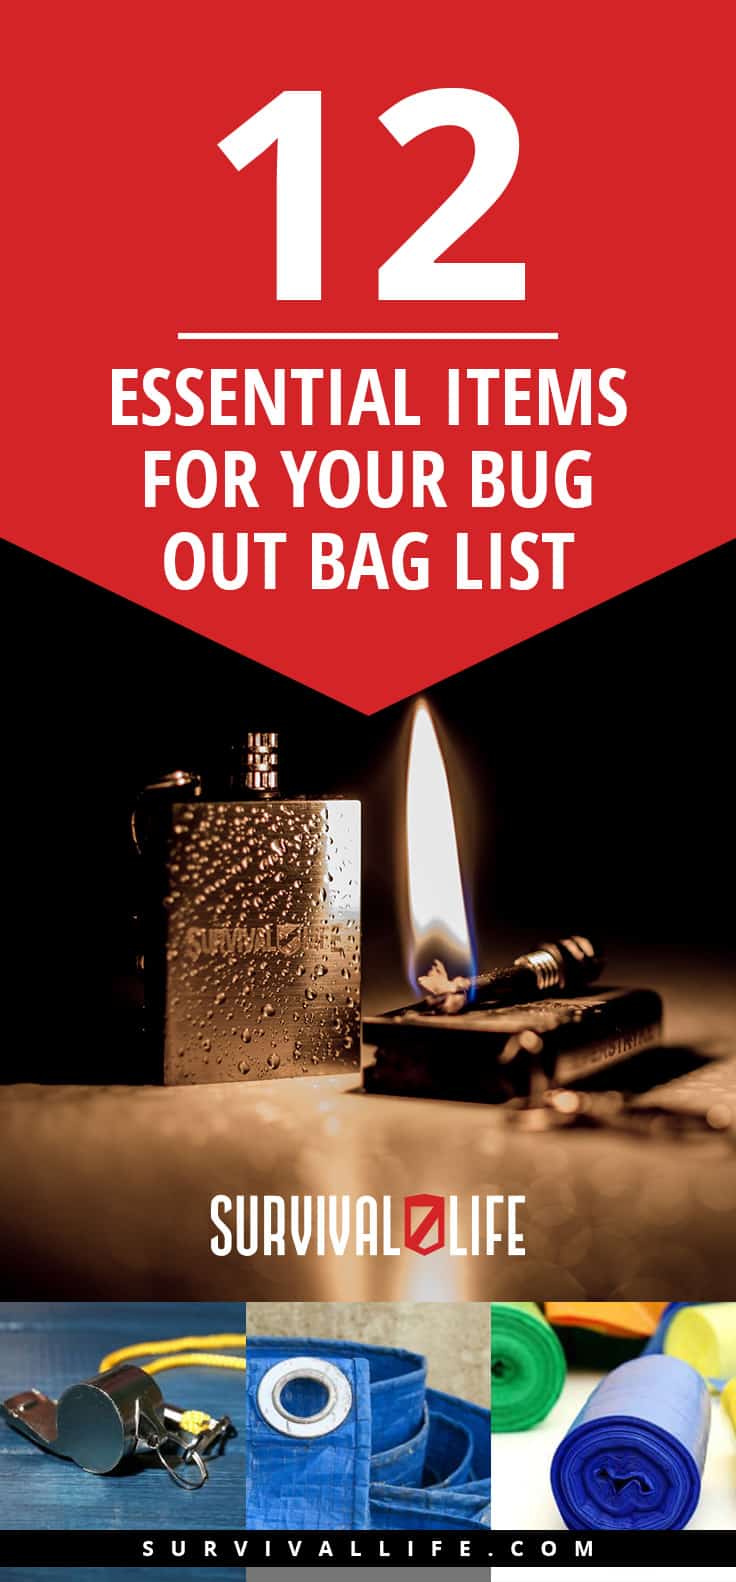 12 Essential Items for Bug Out Bag